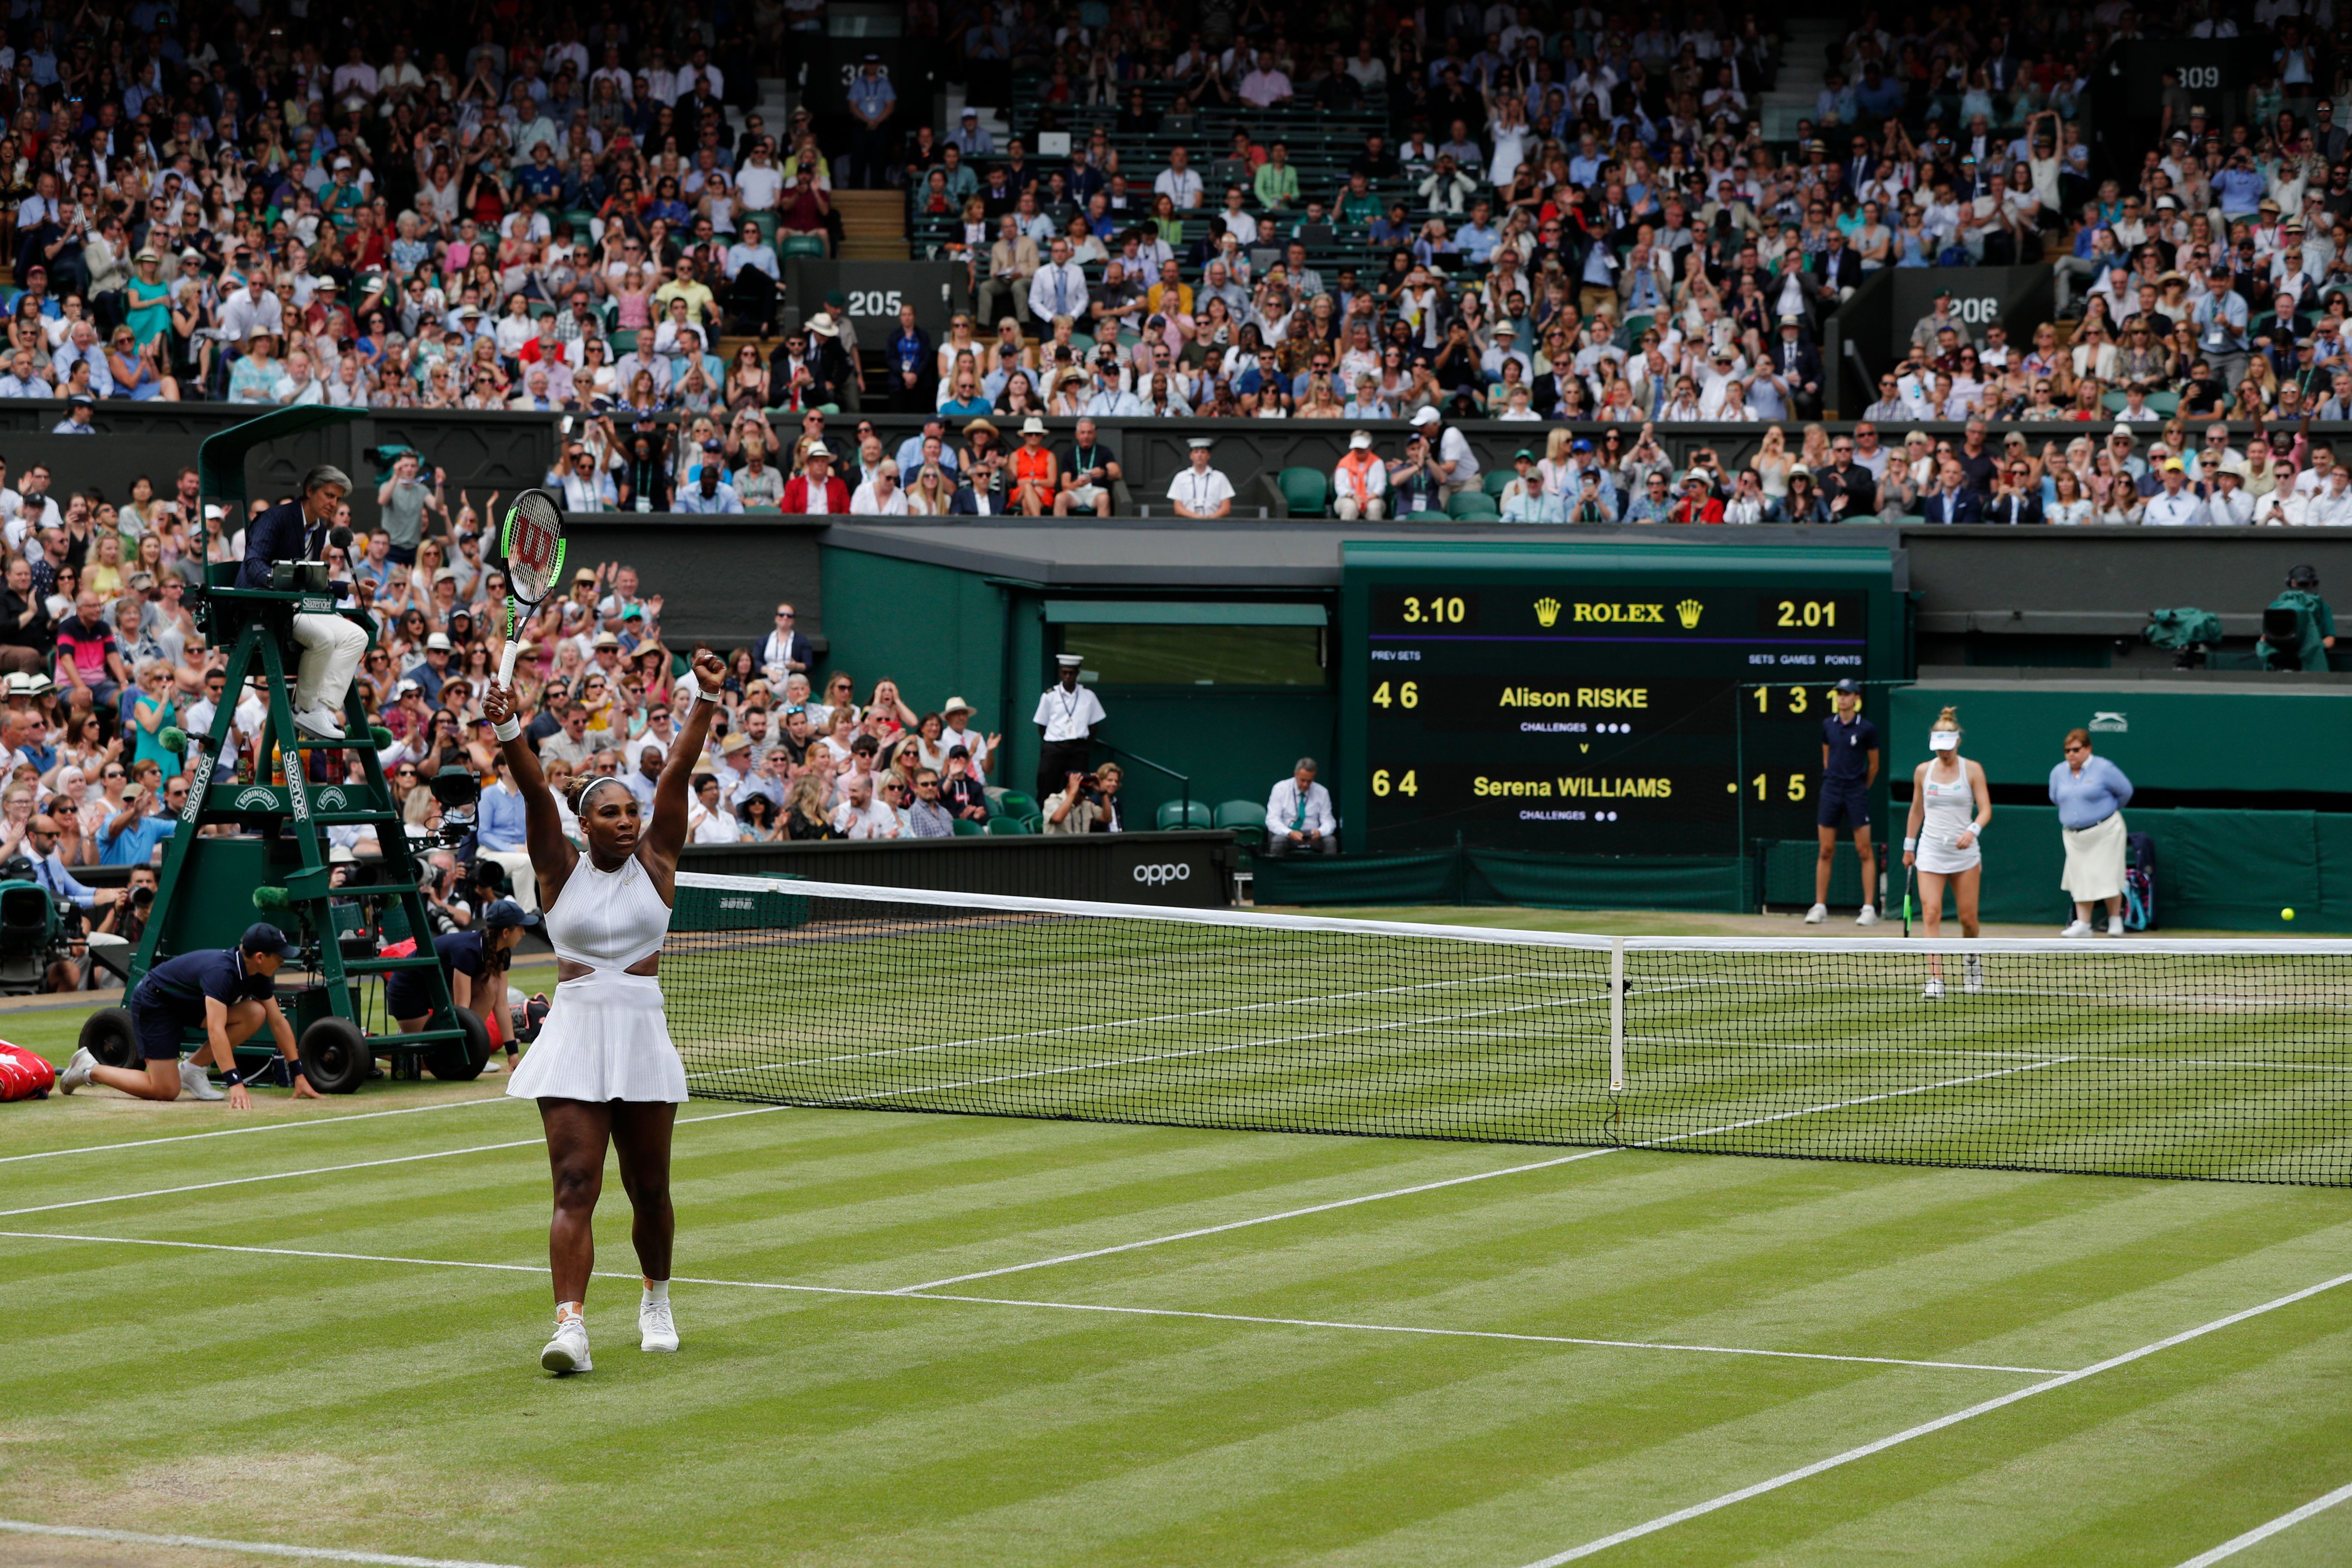 Wimbledon Mens and Womens Finals Tickets Will Be the Same Price